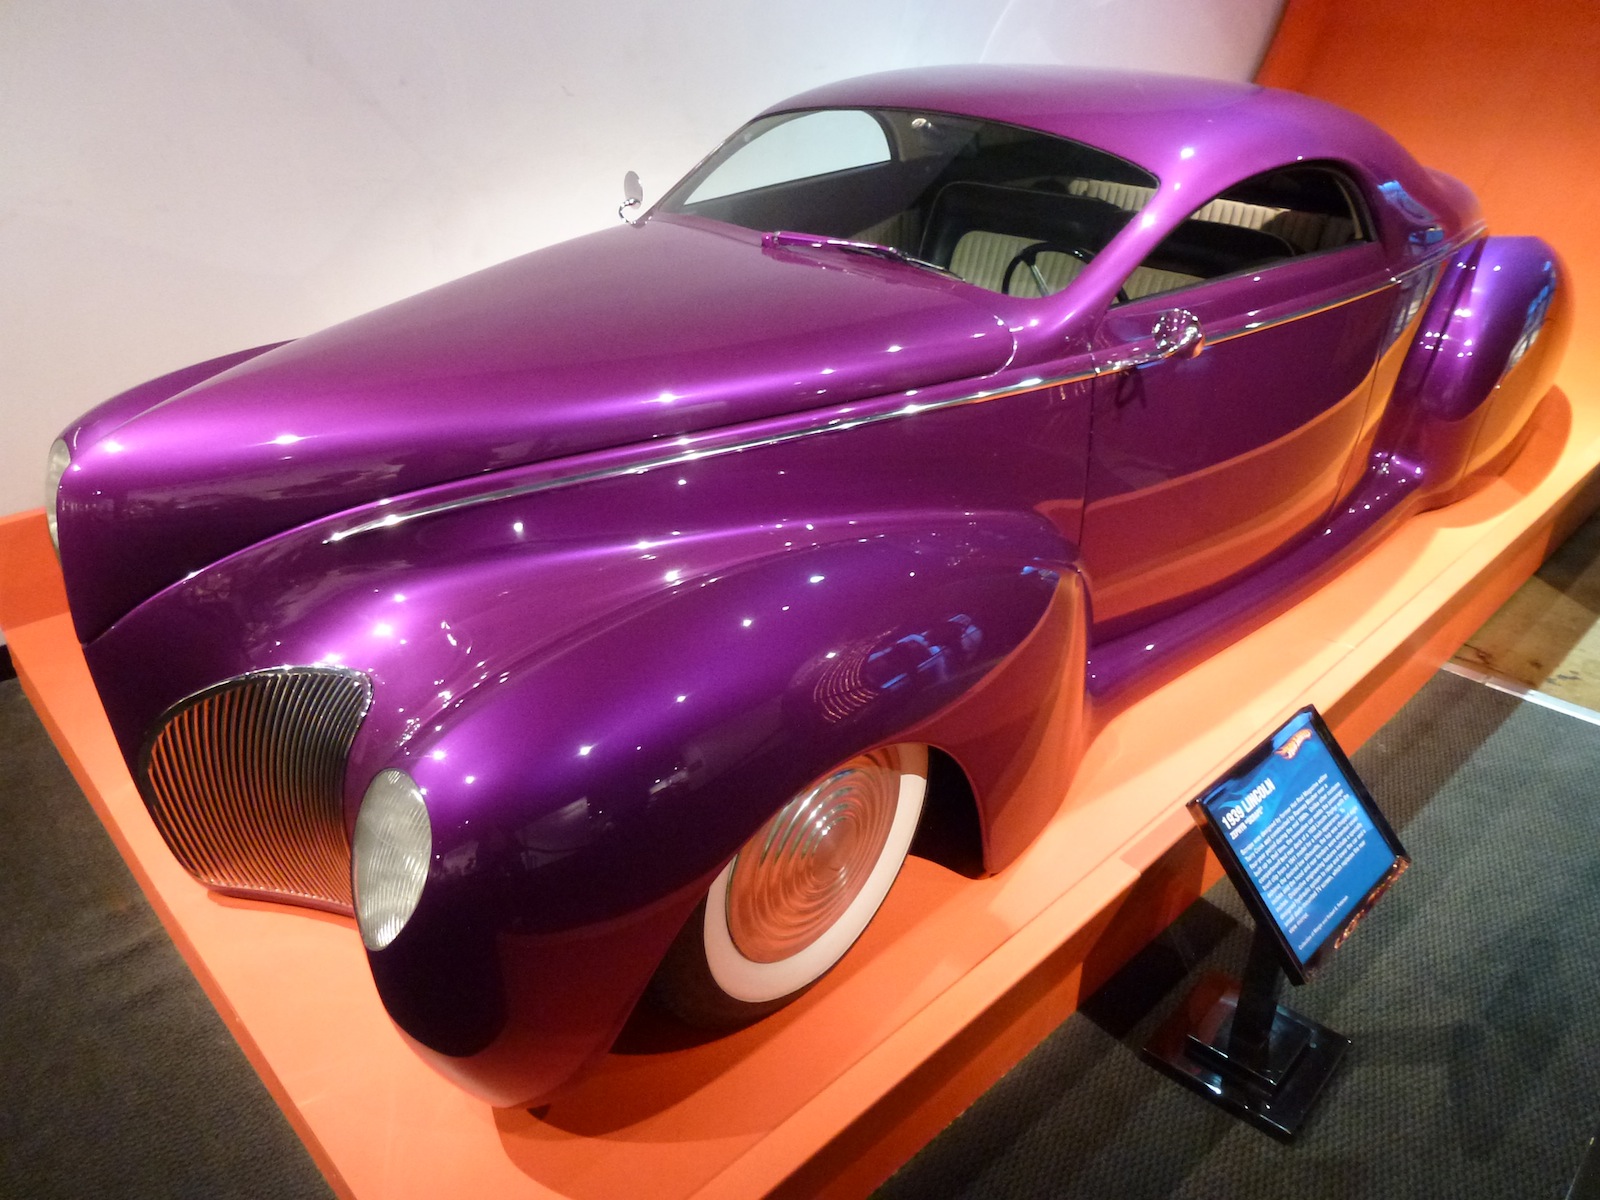 Illegal Car Customizations - Why They Could Get You In Trouble